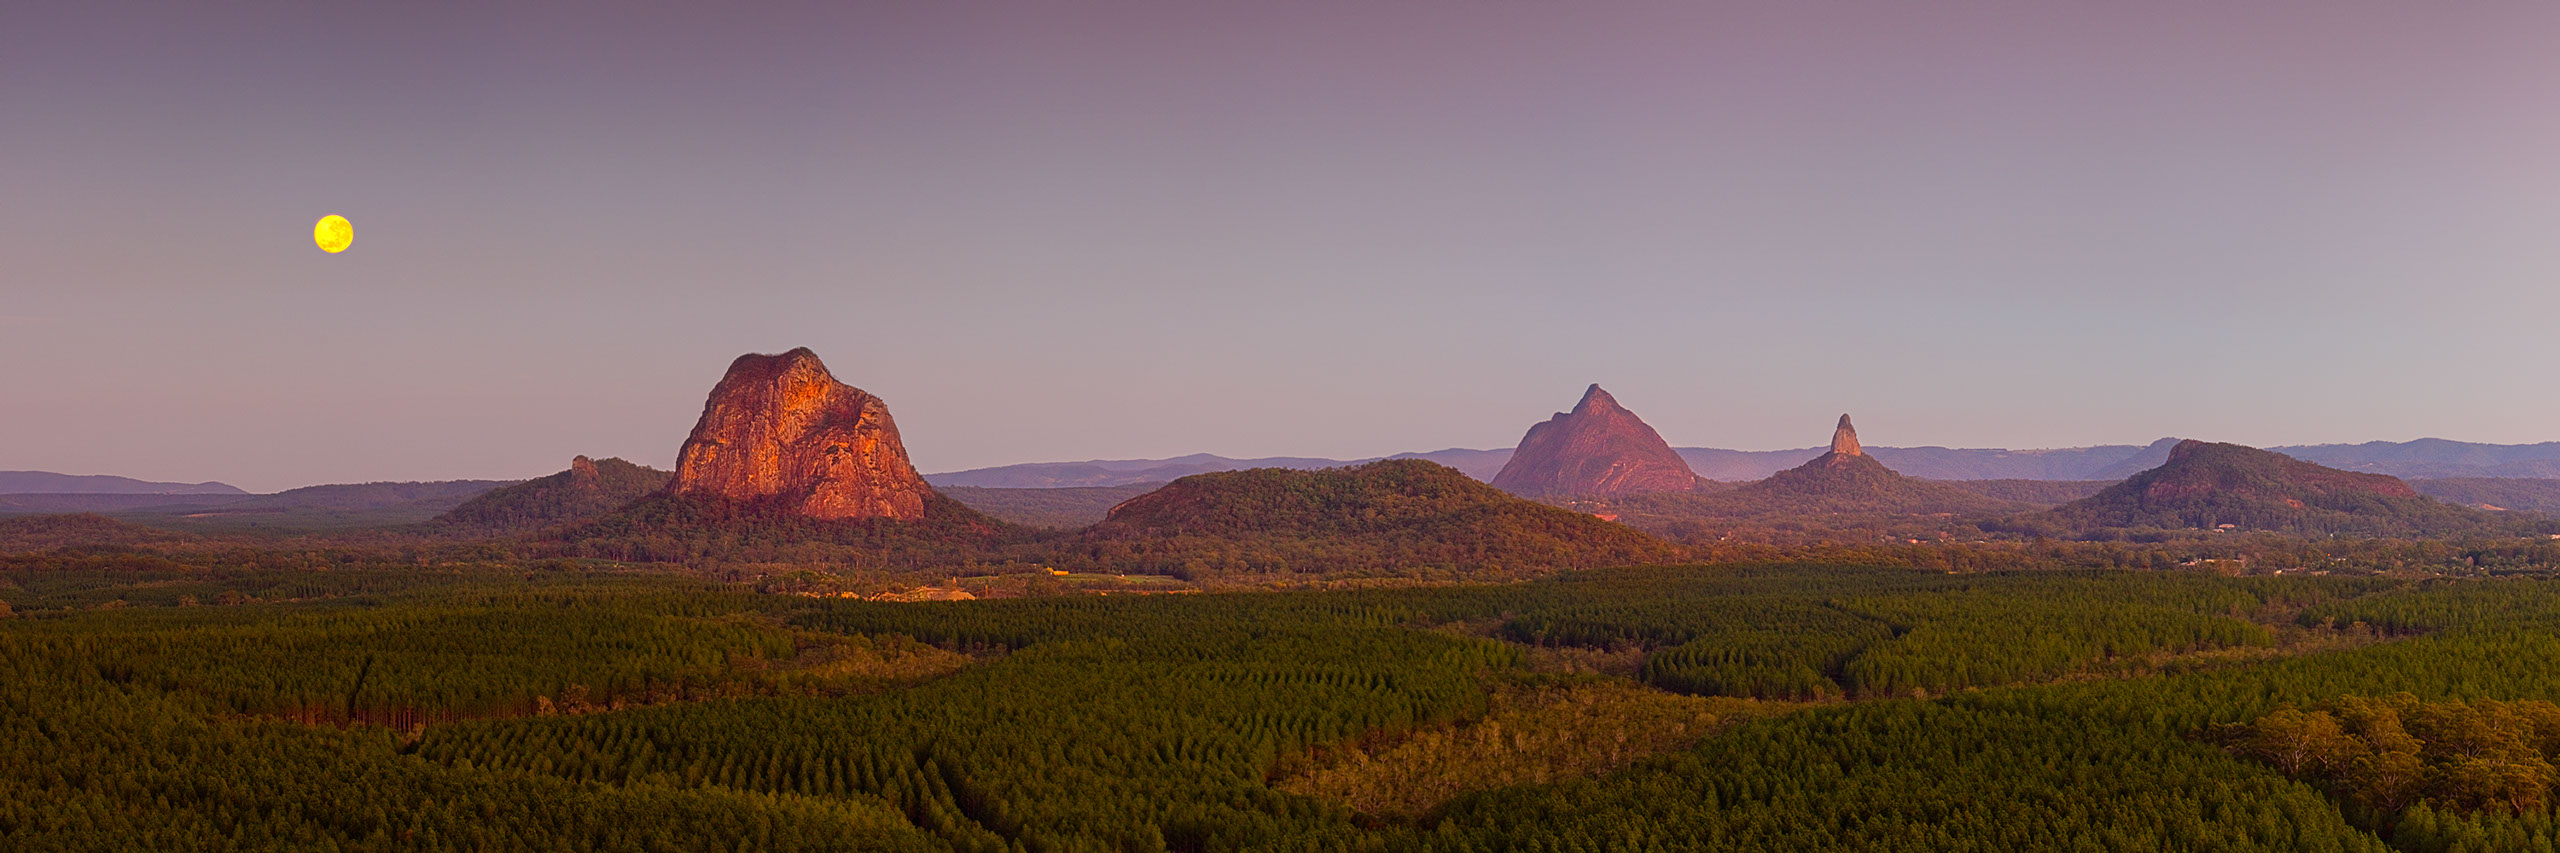 Glasshouse Mountains svg #9, Download drawings